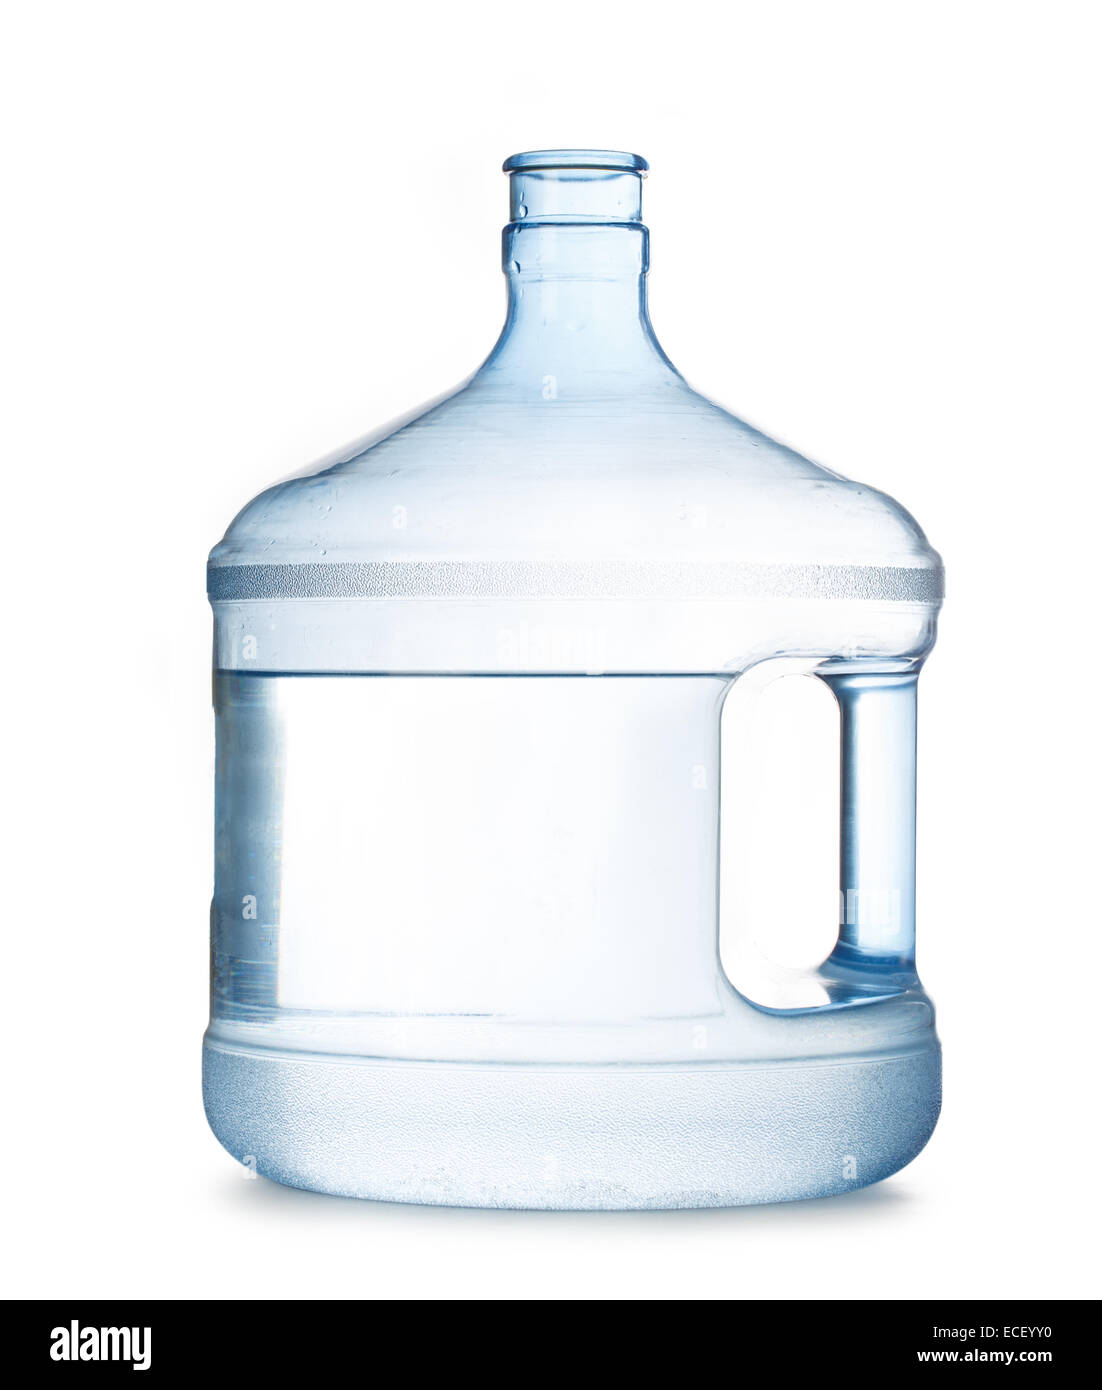 Big bottle 5 liters of water, isolated on a white background. 3d render  Stock Photo by ©Kodochigov 118601264